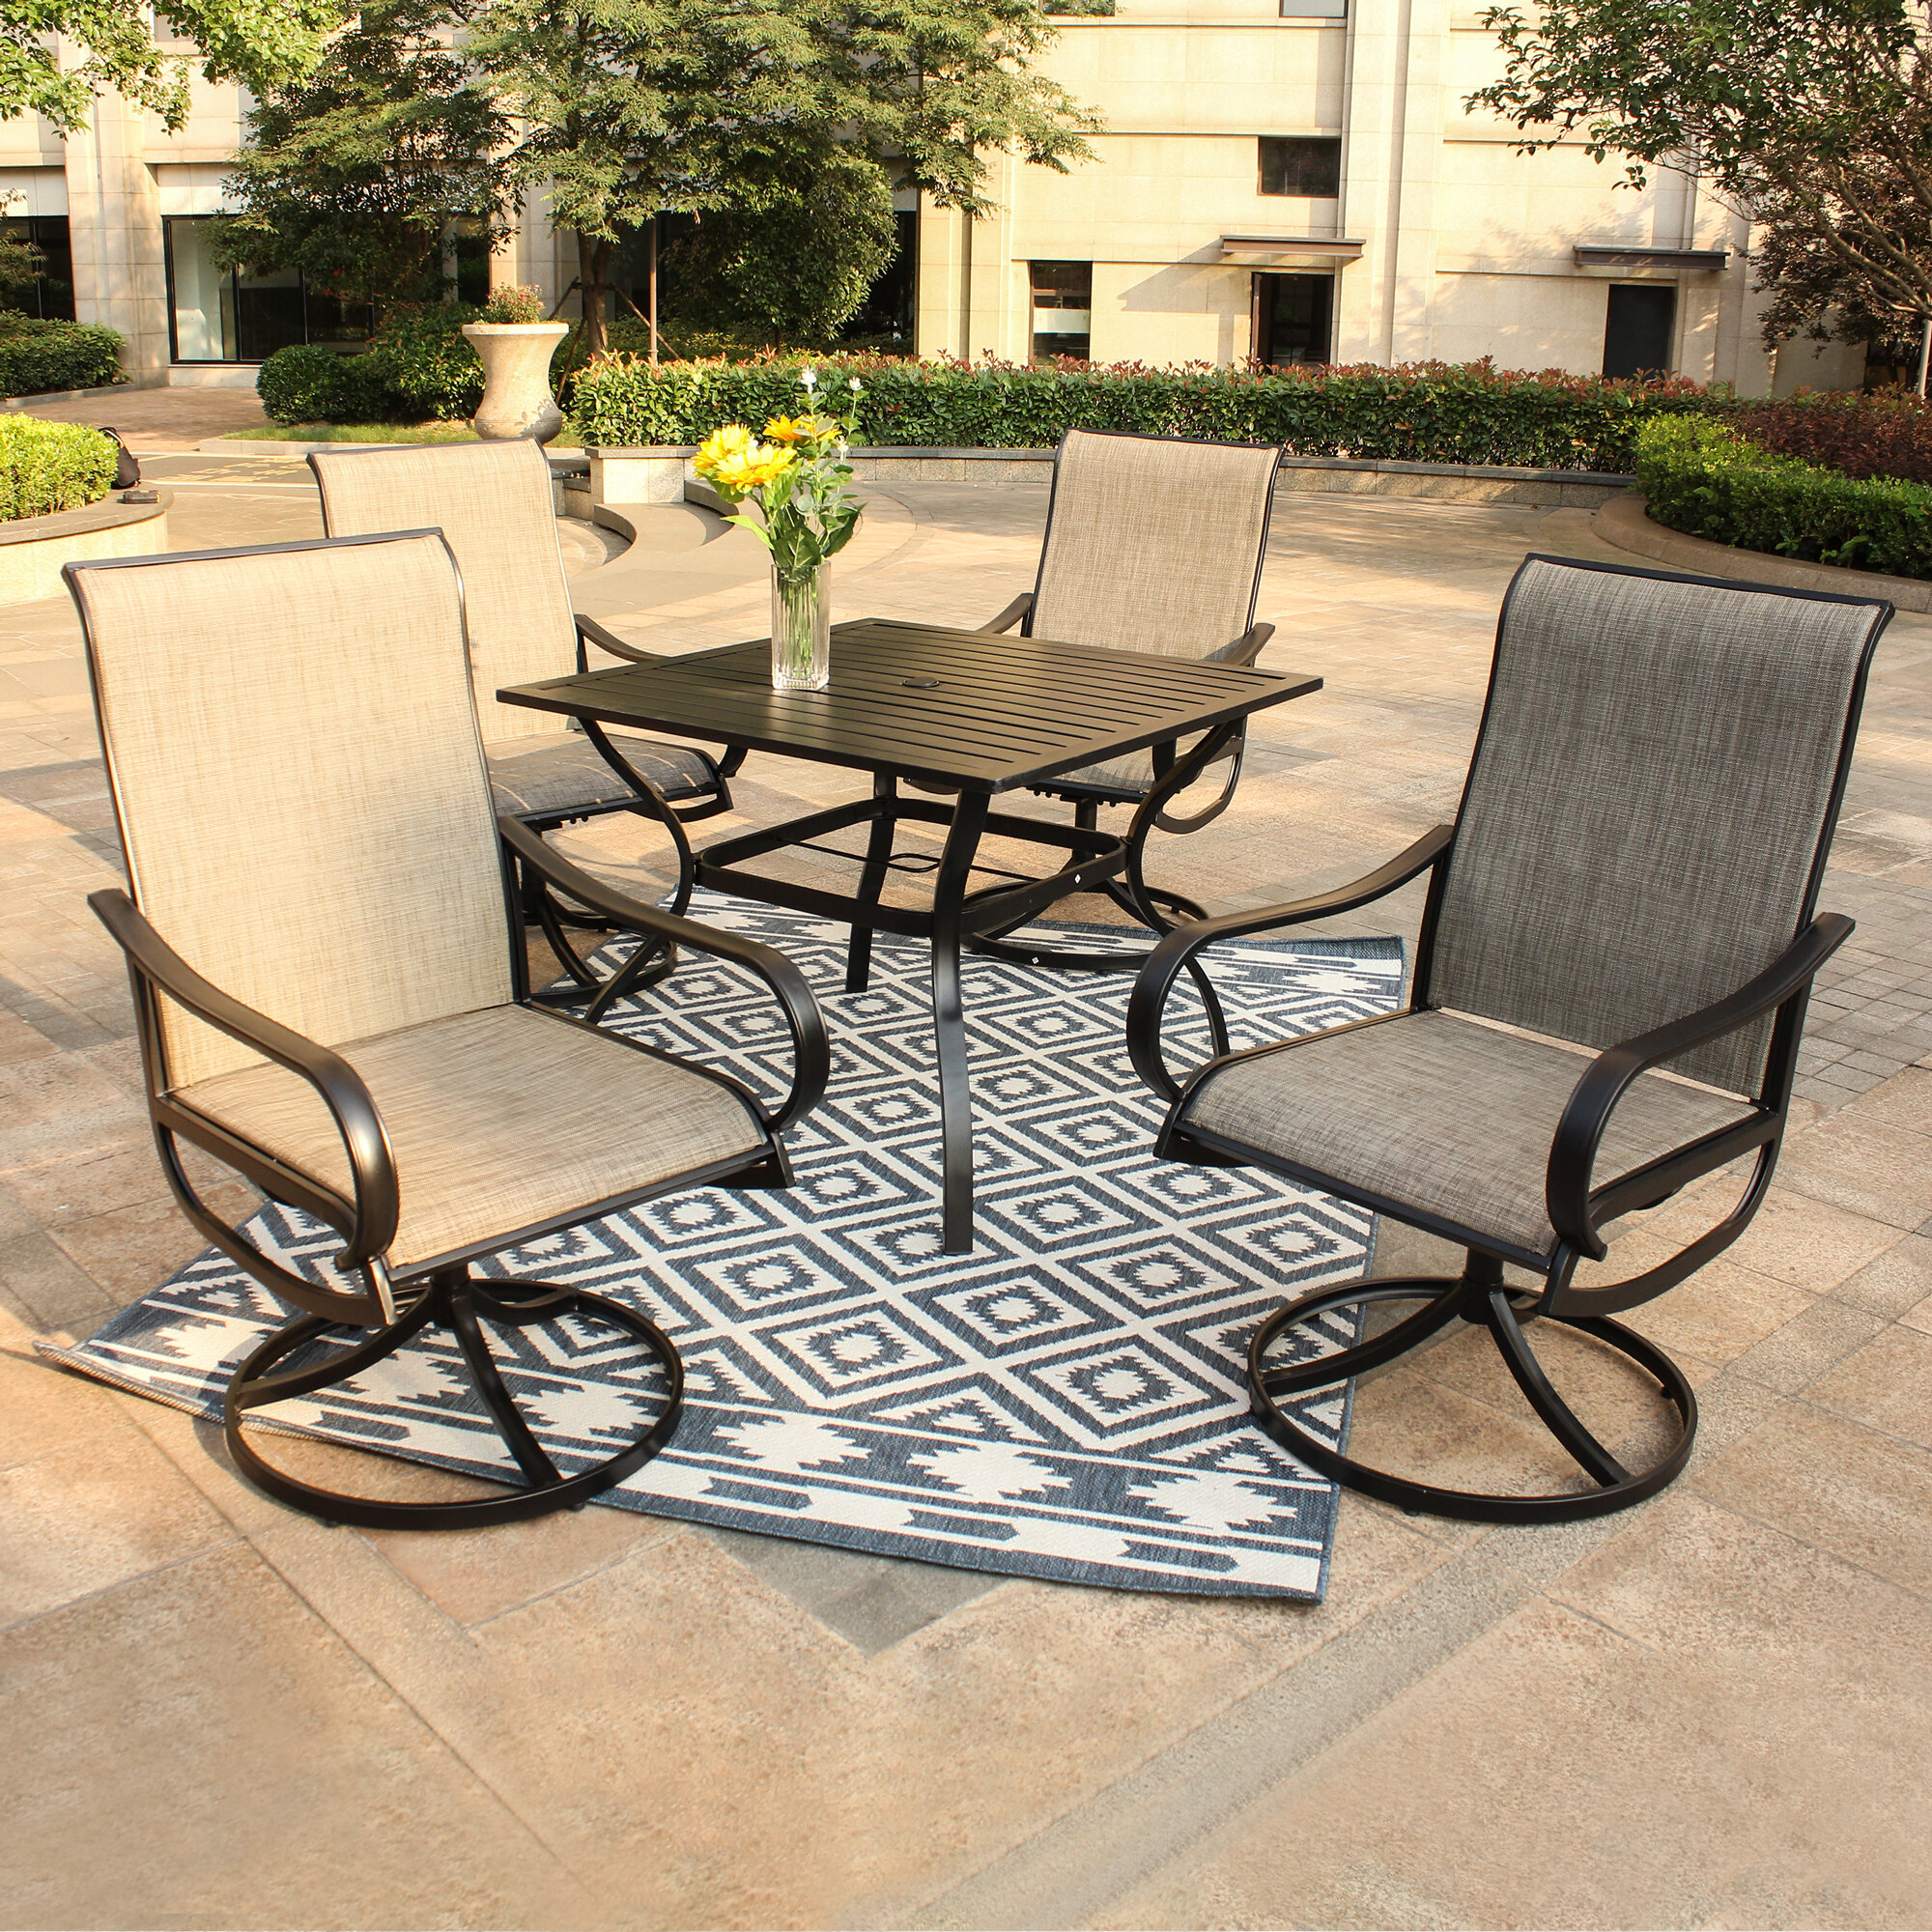 for Outdoor Kitchen Lawn & Garden Bigroof Outdoor Dining Set 5 Pieces Patio Dining Table & Chairs Set Clearance with 4 Swivel Textilene Dining Chairs & 1 Square 37x37 Umbrella Dining Table